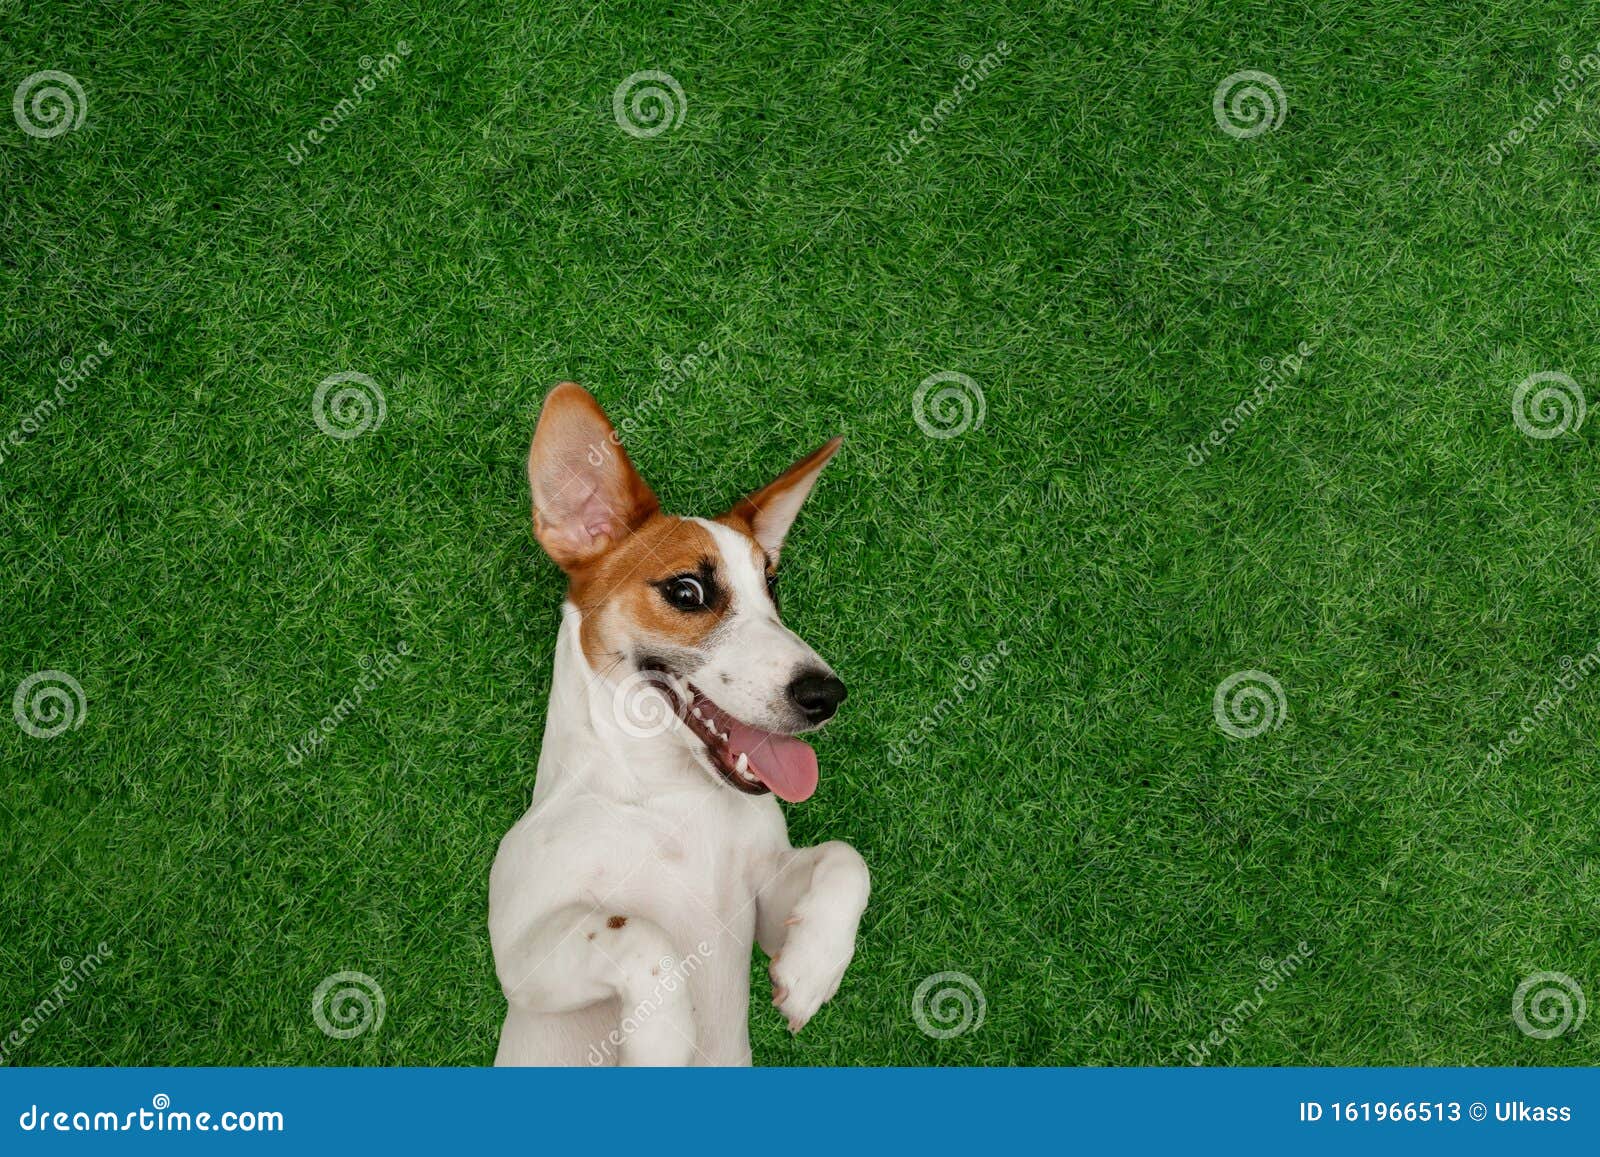 Cubierta Para Pasaporte My Daily Jack Russell Dog Summer H 